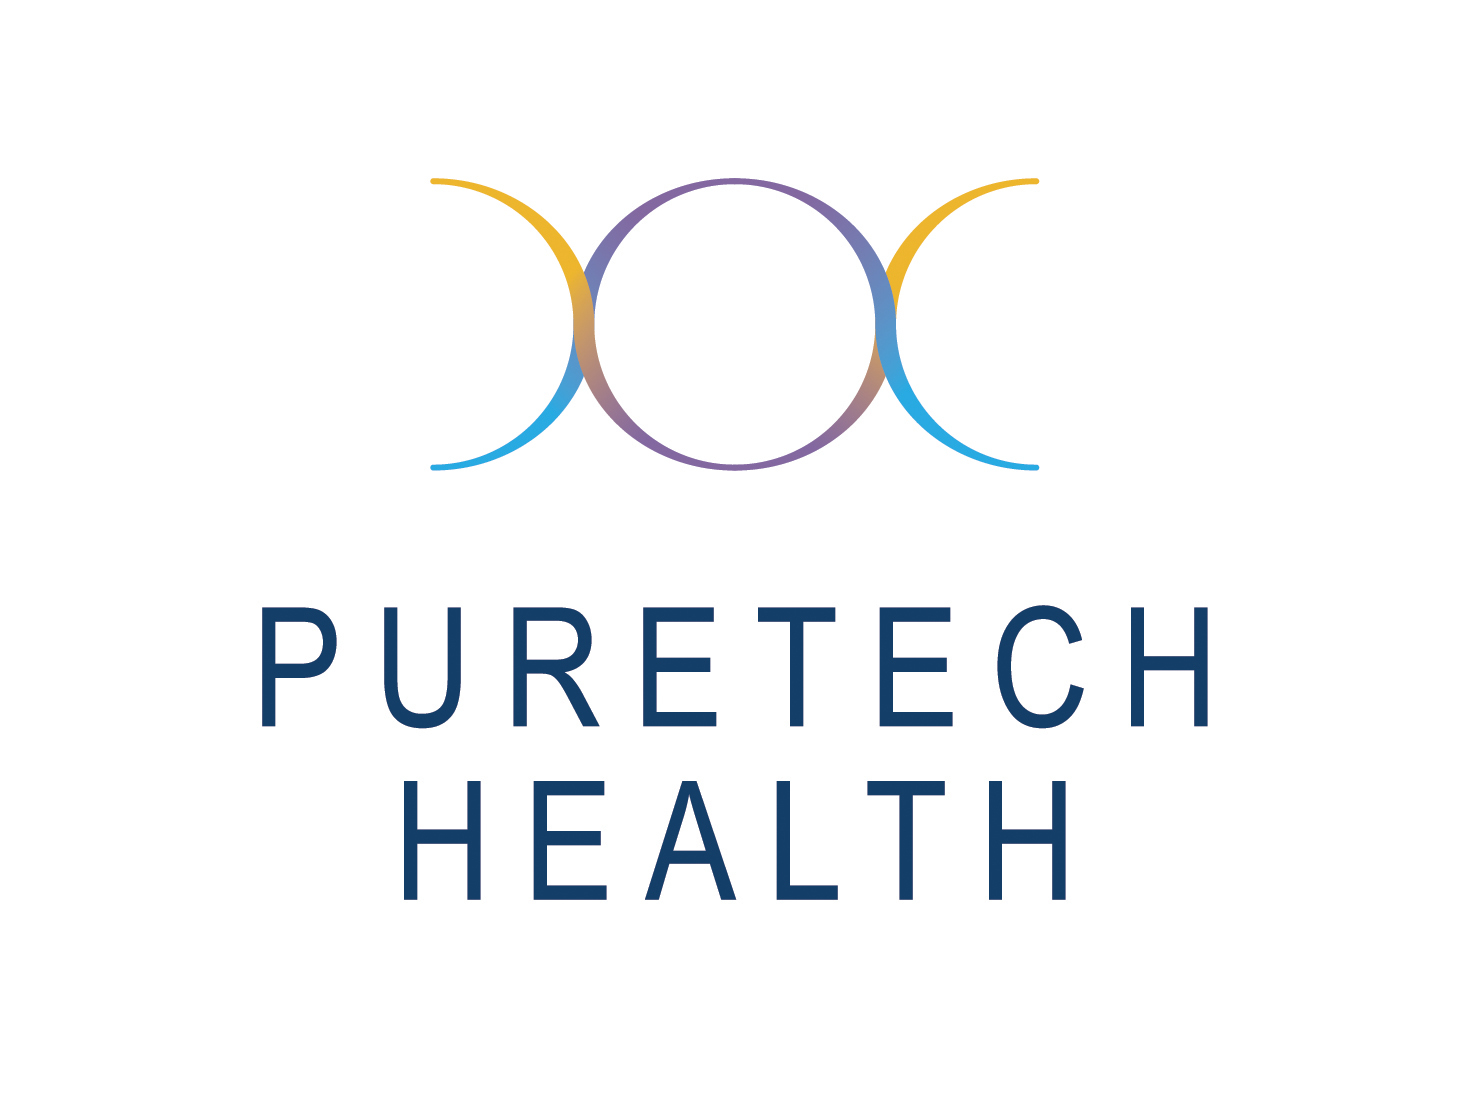 PureTech Health Appoints Joep Muijrers As Chief Financial Officer Business Wire